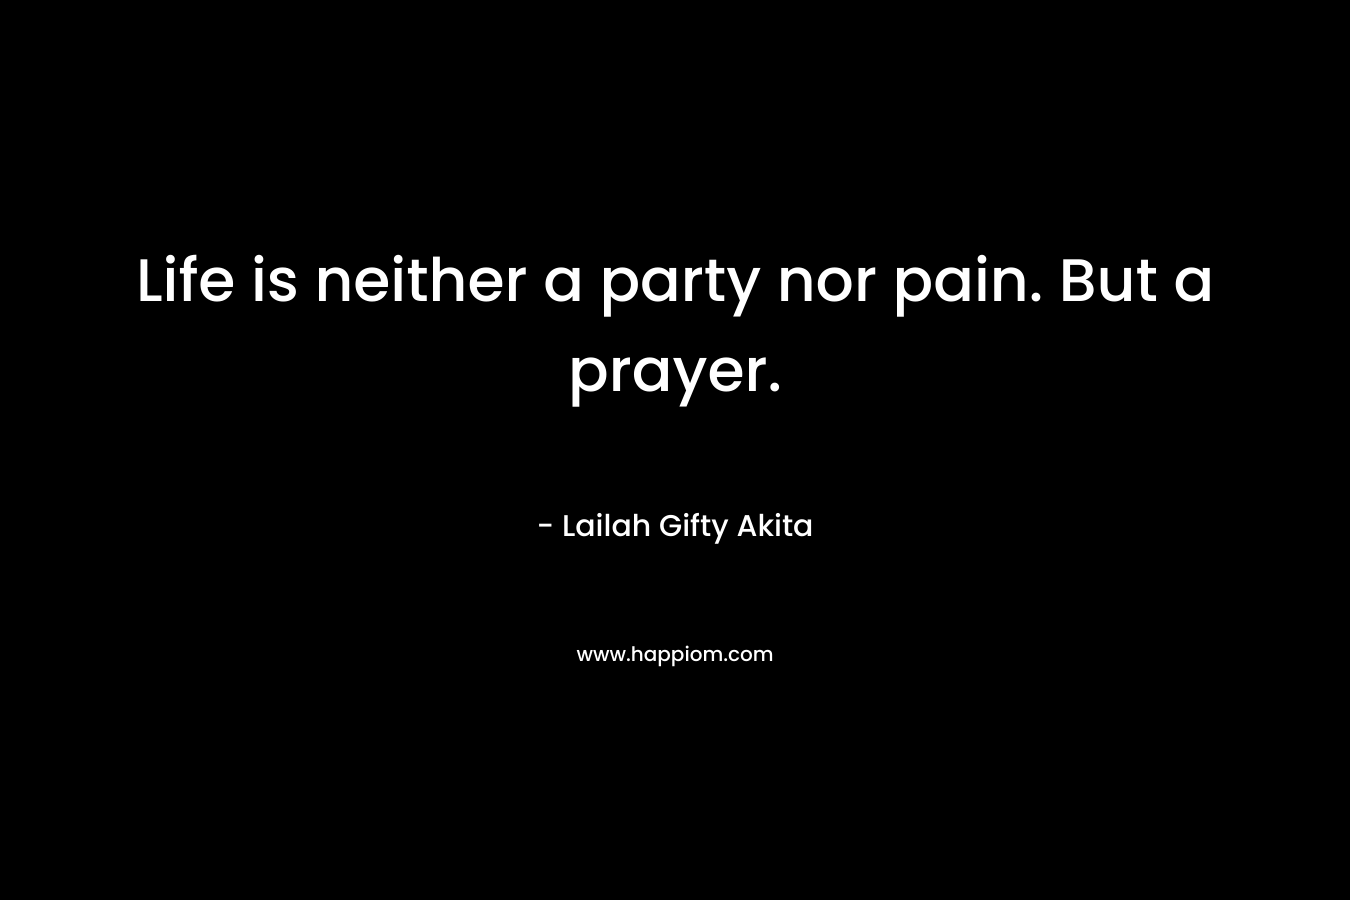 Life is neither a party nor pain. But a prayer.